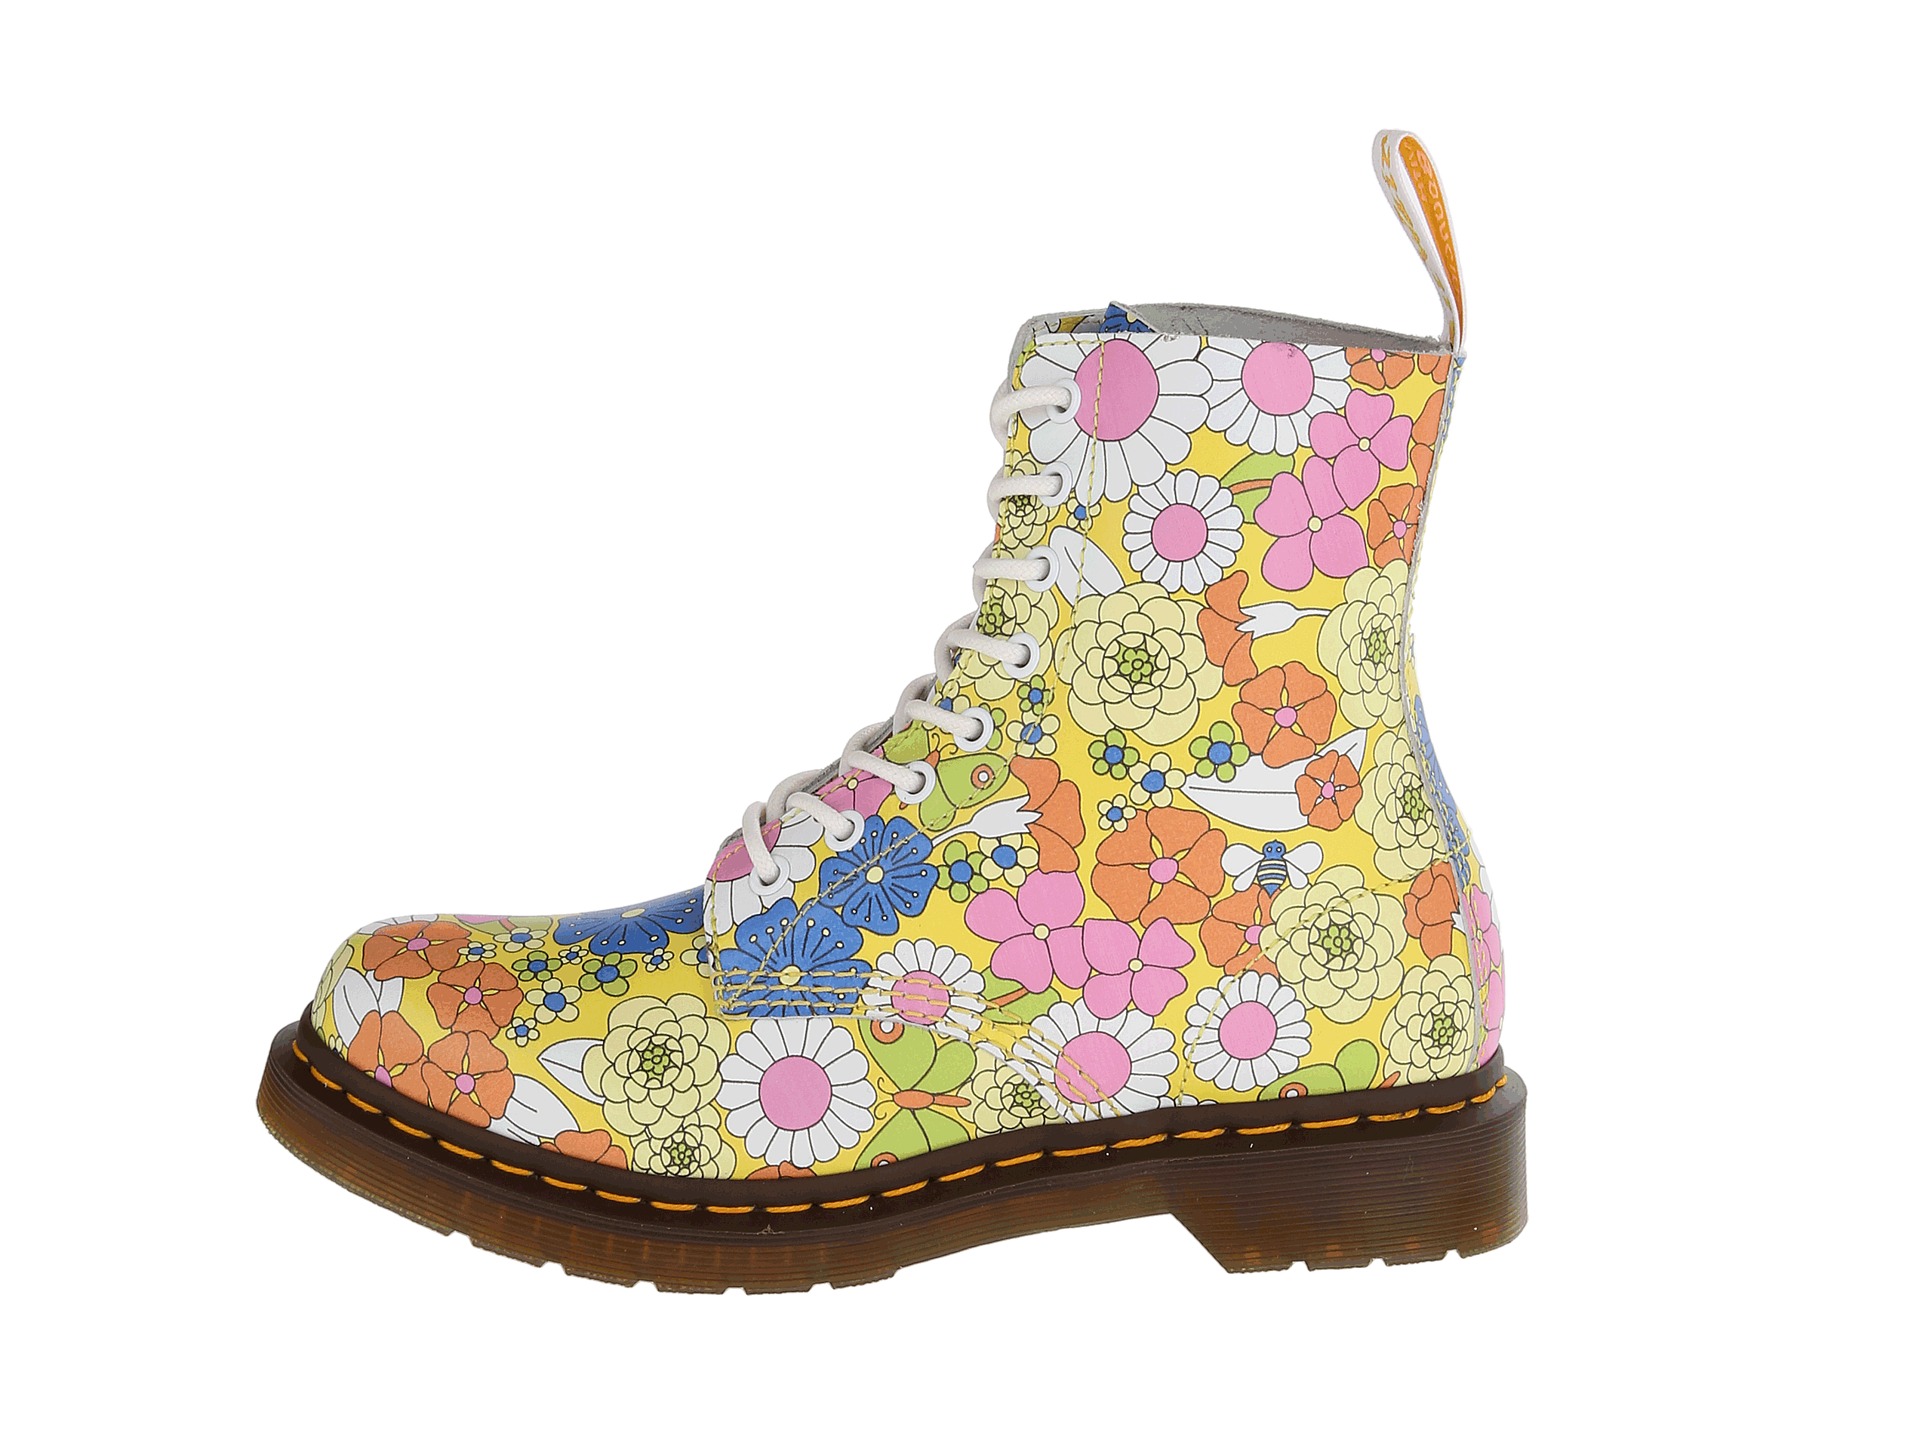 Dr Martens Pascal 8 Eye Boot Yellow Vintage Daisy | Shipped Free at Zappos